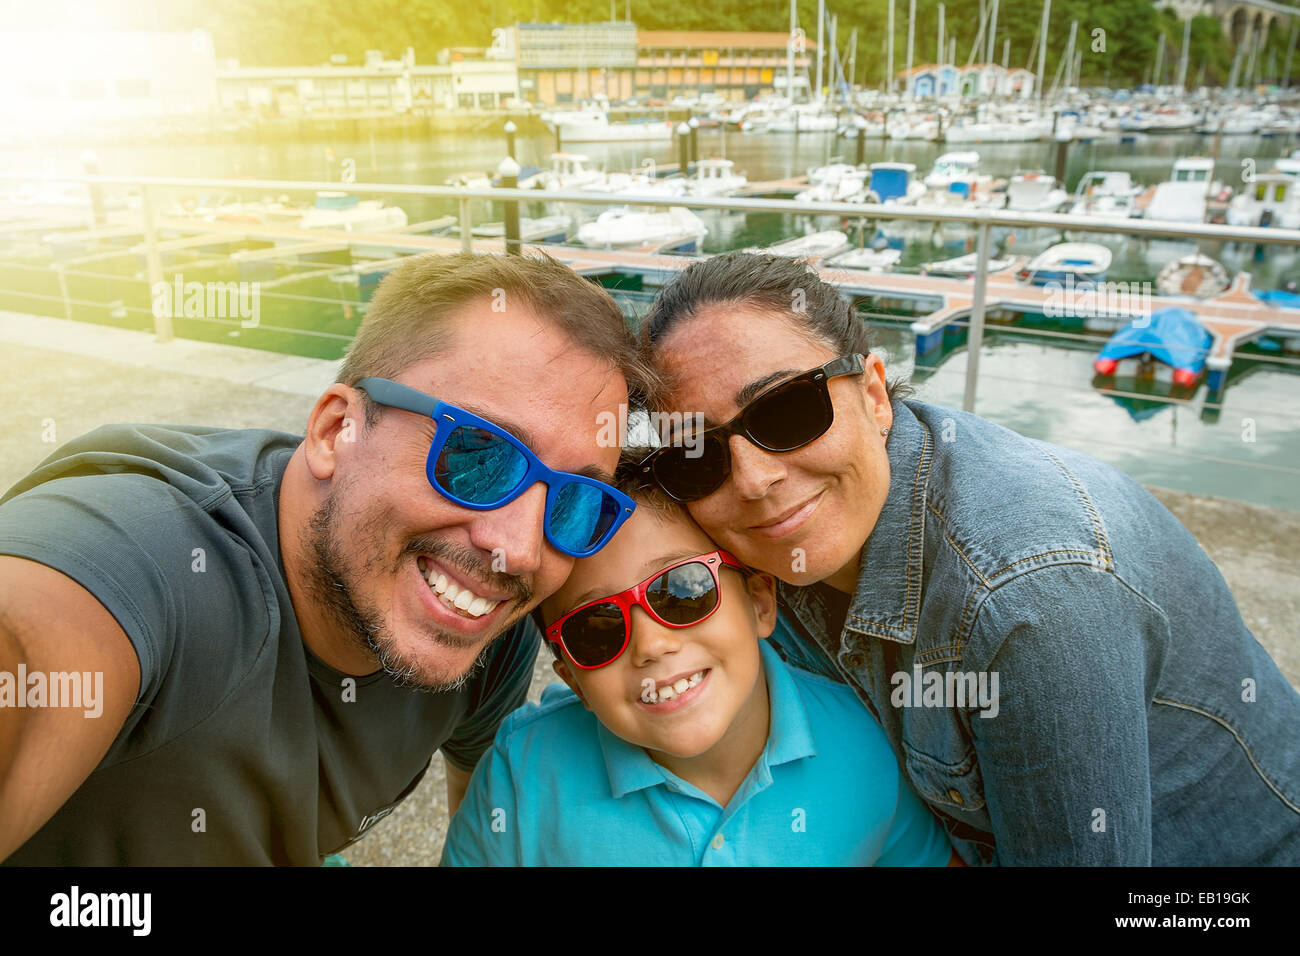 Family having fun wearing sunglasses & waving to a camera taking selfie photograph on summer holiday Stock Photo